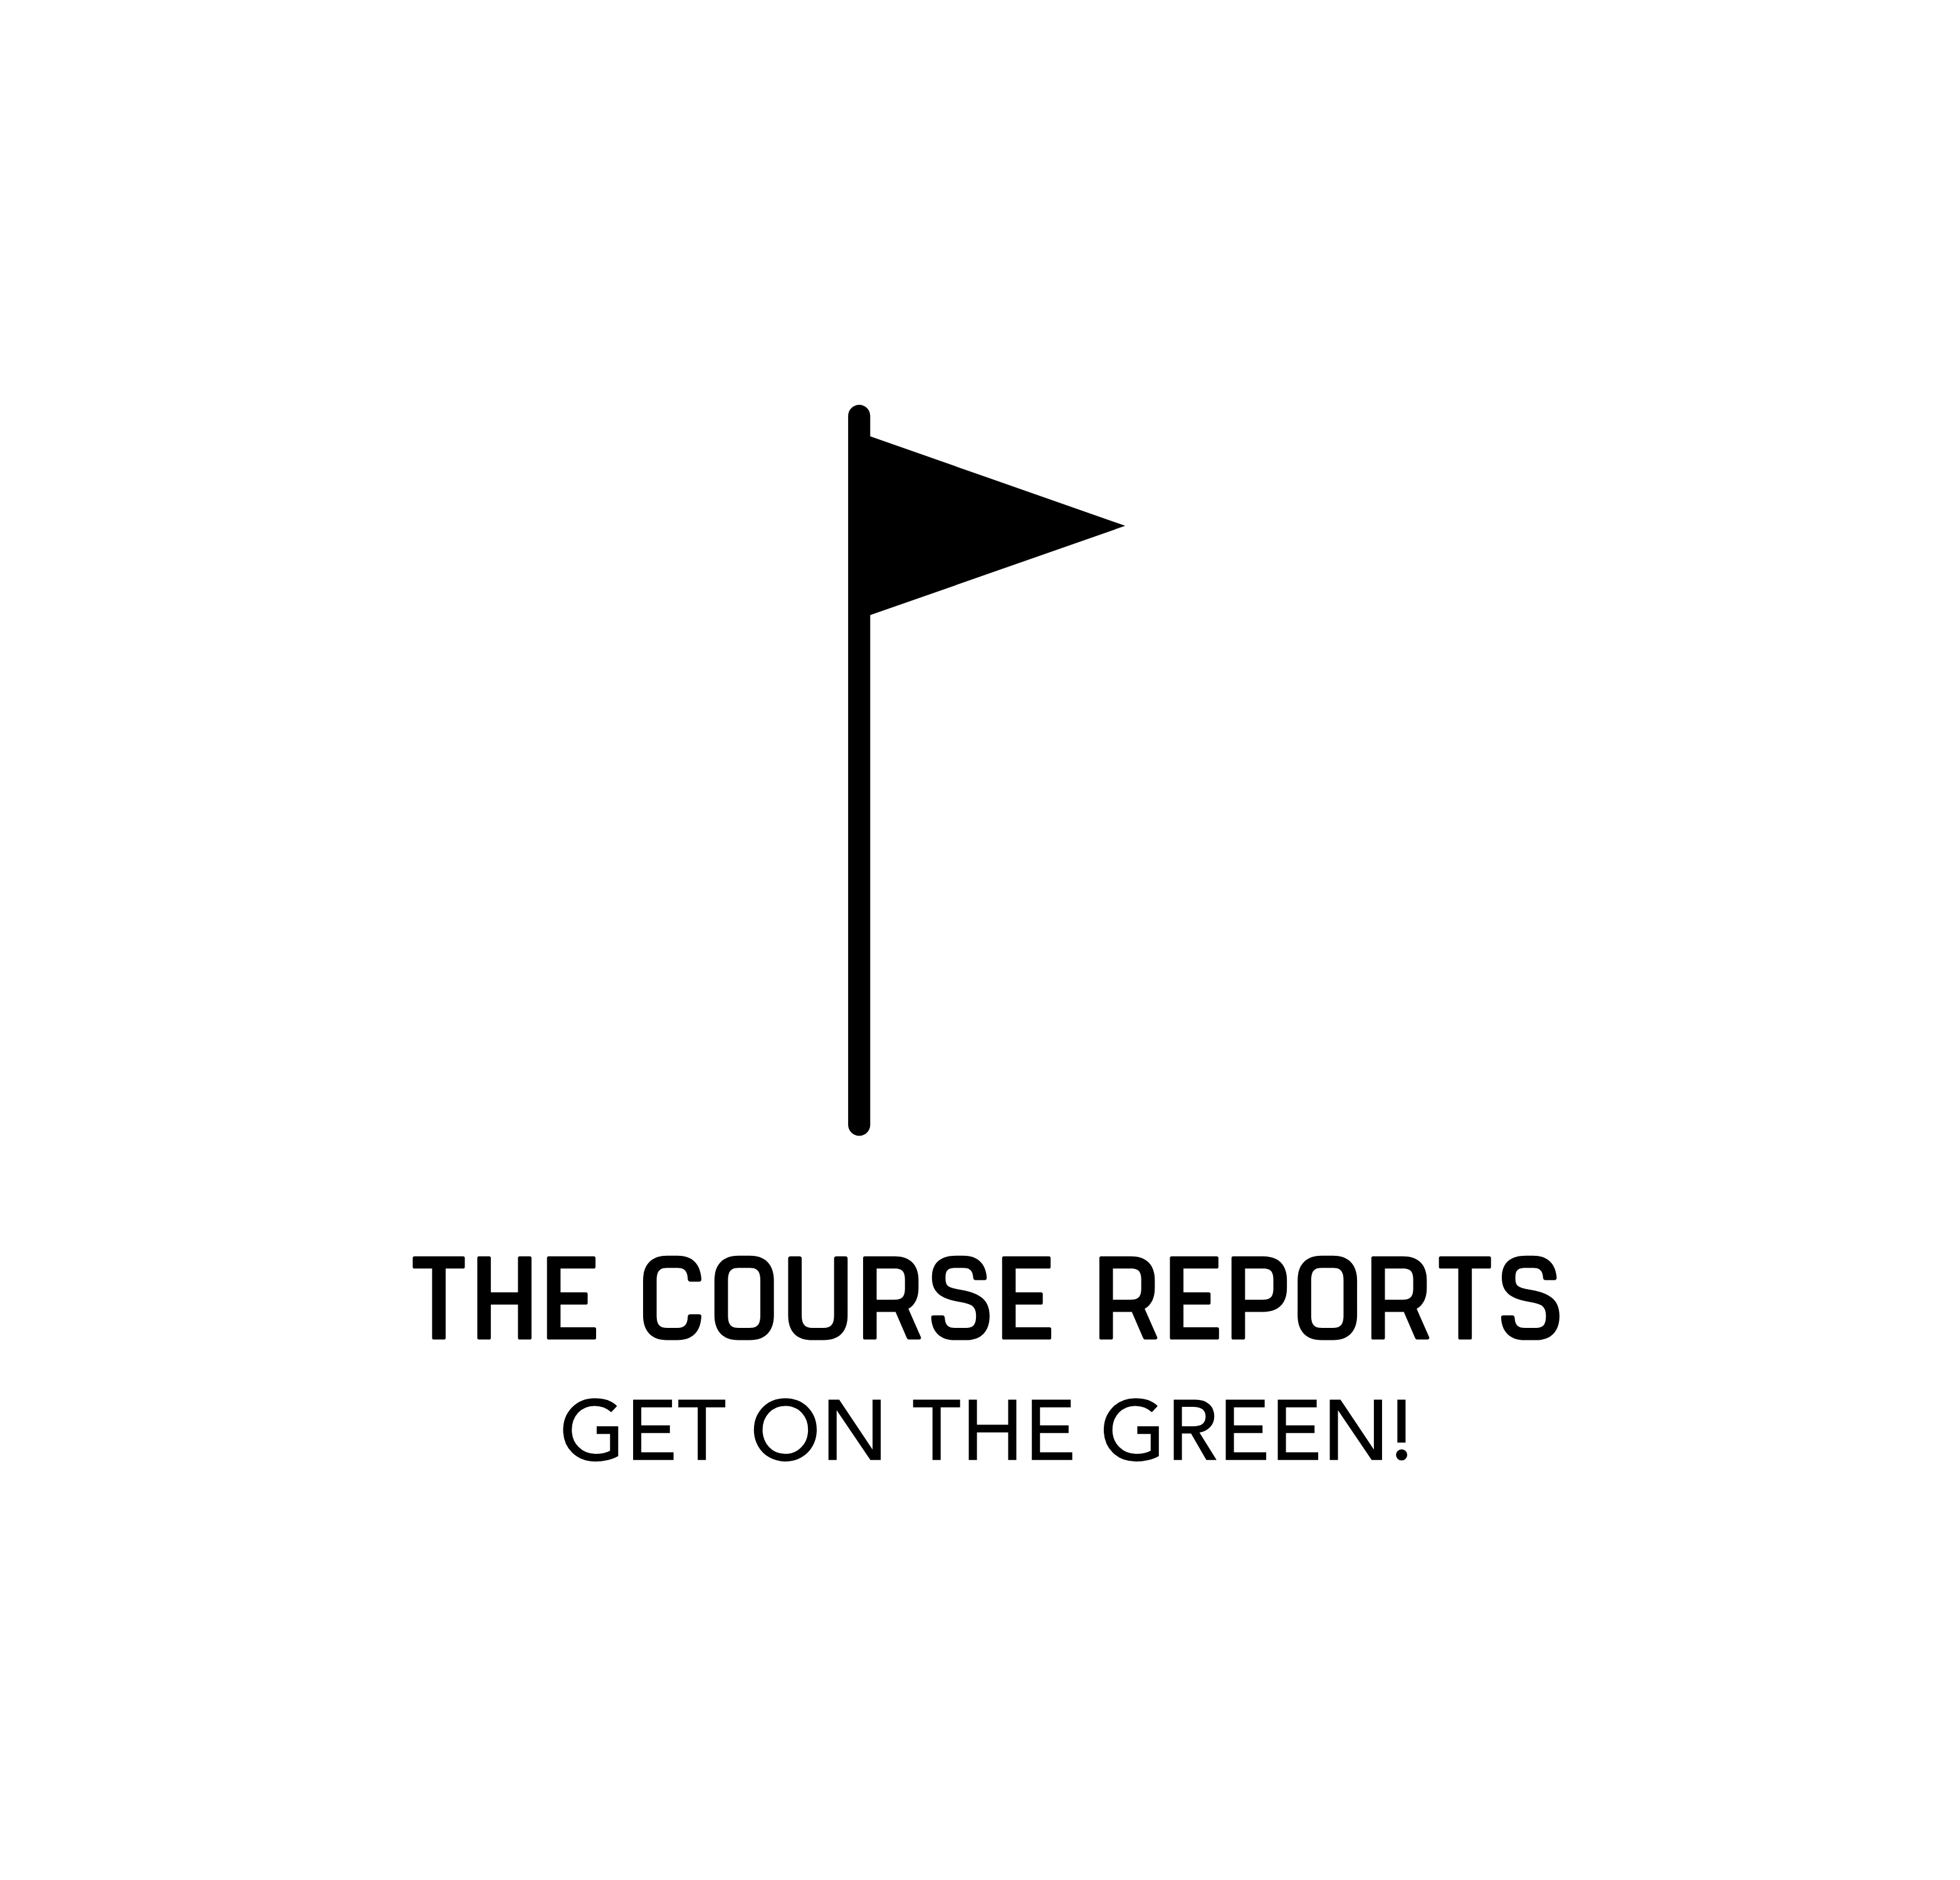 The Course Reports